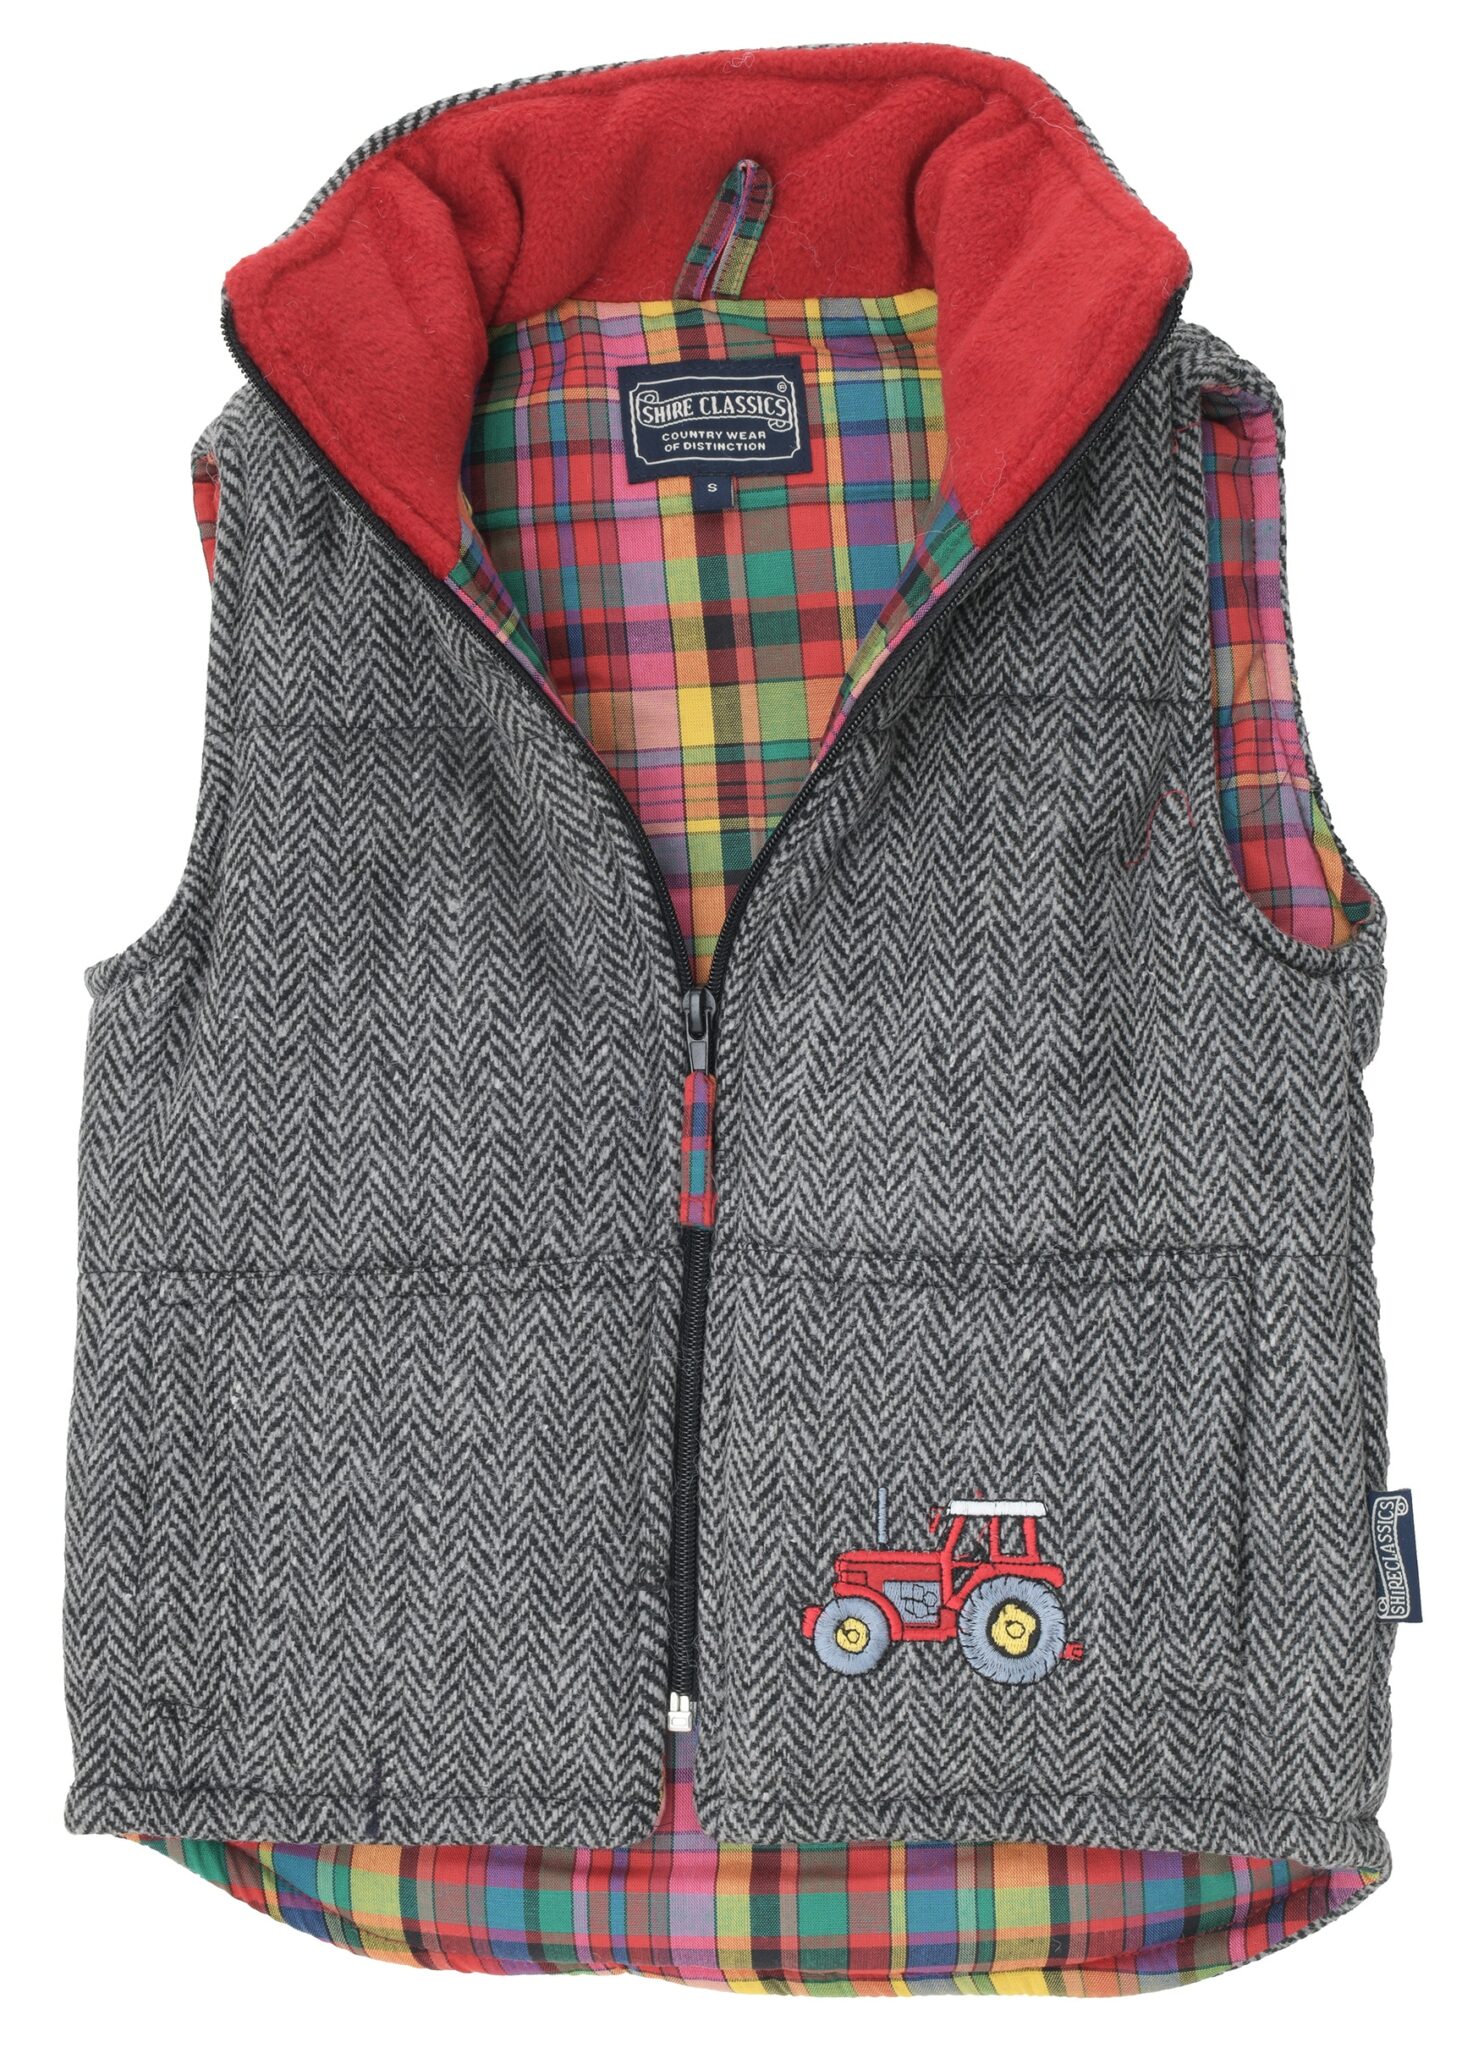 Lambland Boy's Childrens Embroidered Digger Gilet Body Warmer